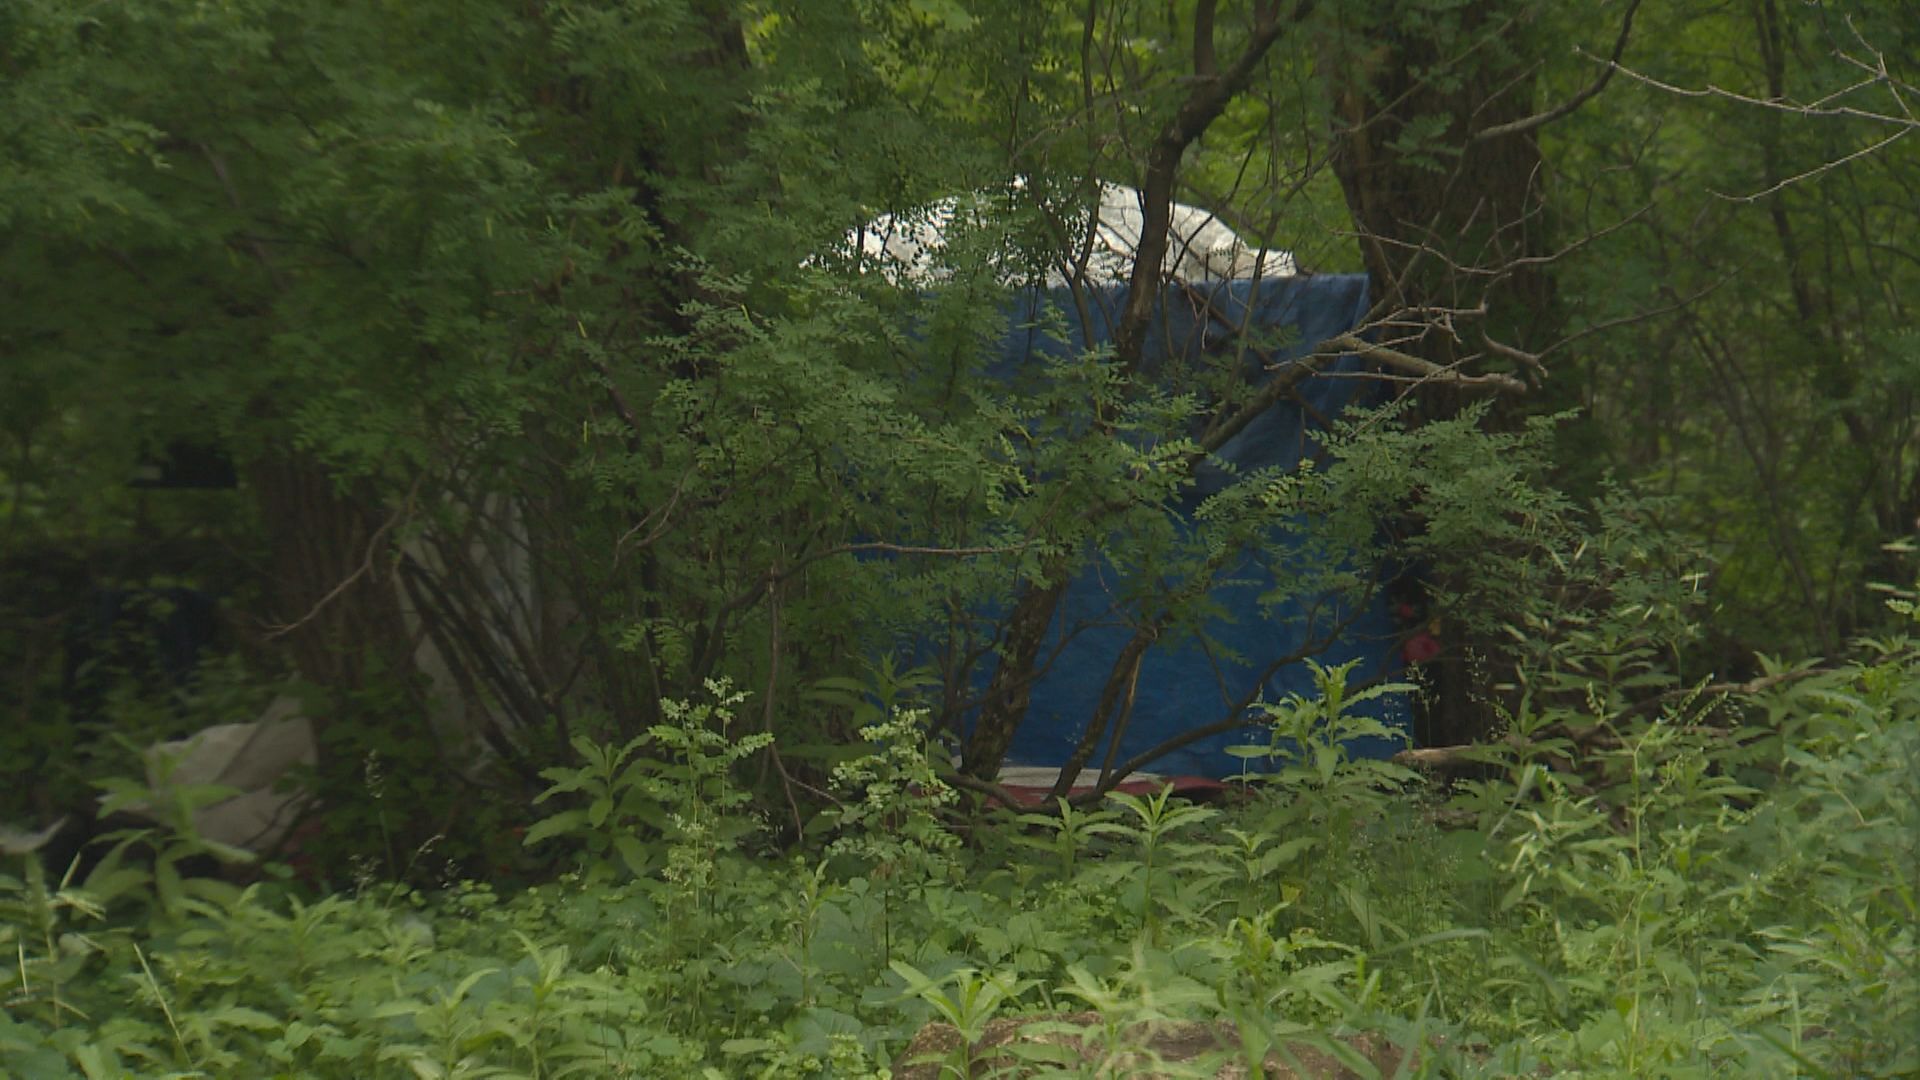 Winnipeg residents voice concerns over safety due to homeless encampments